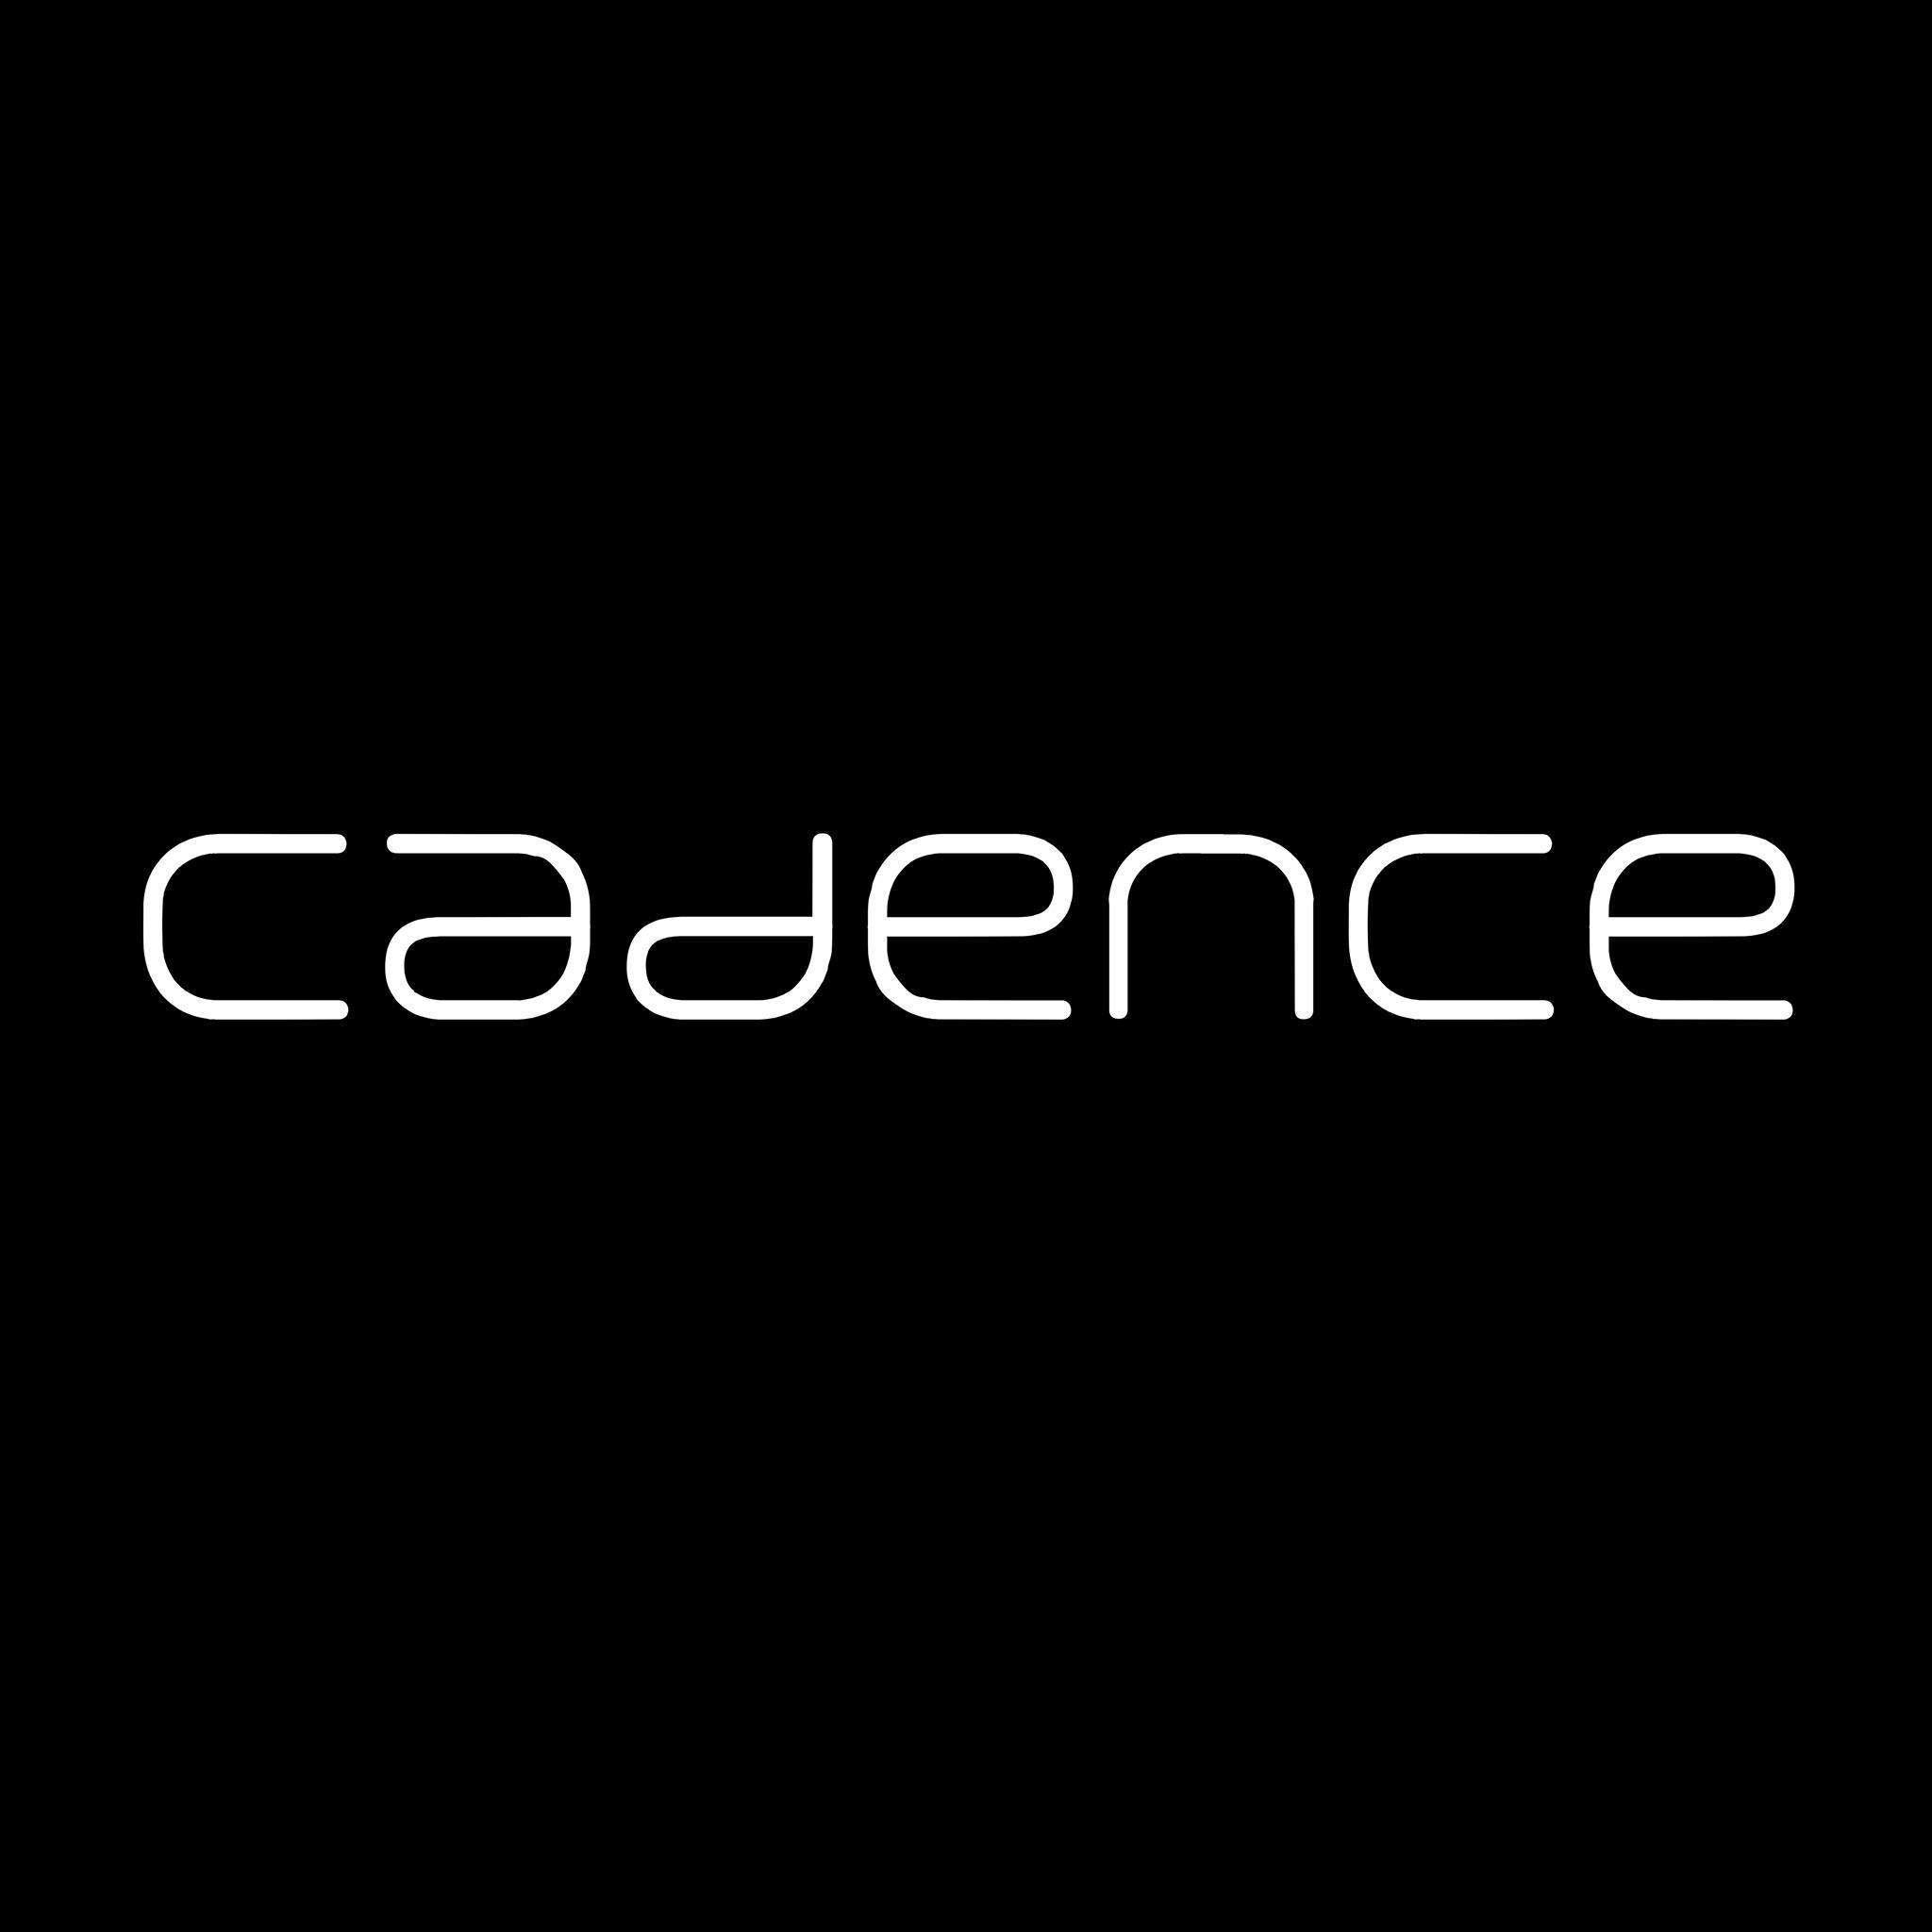 Cadence Architects|IT Services|Professional Services